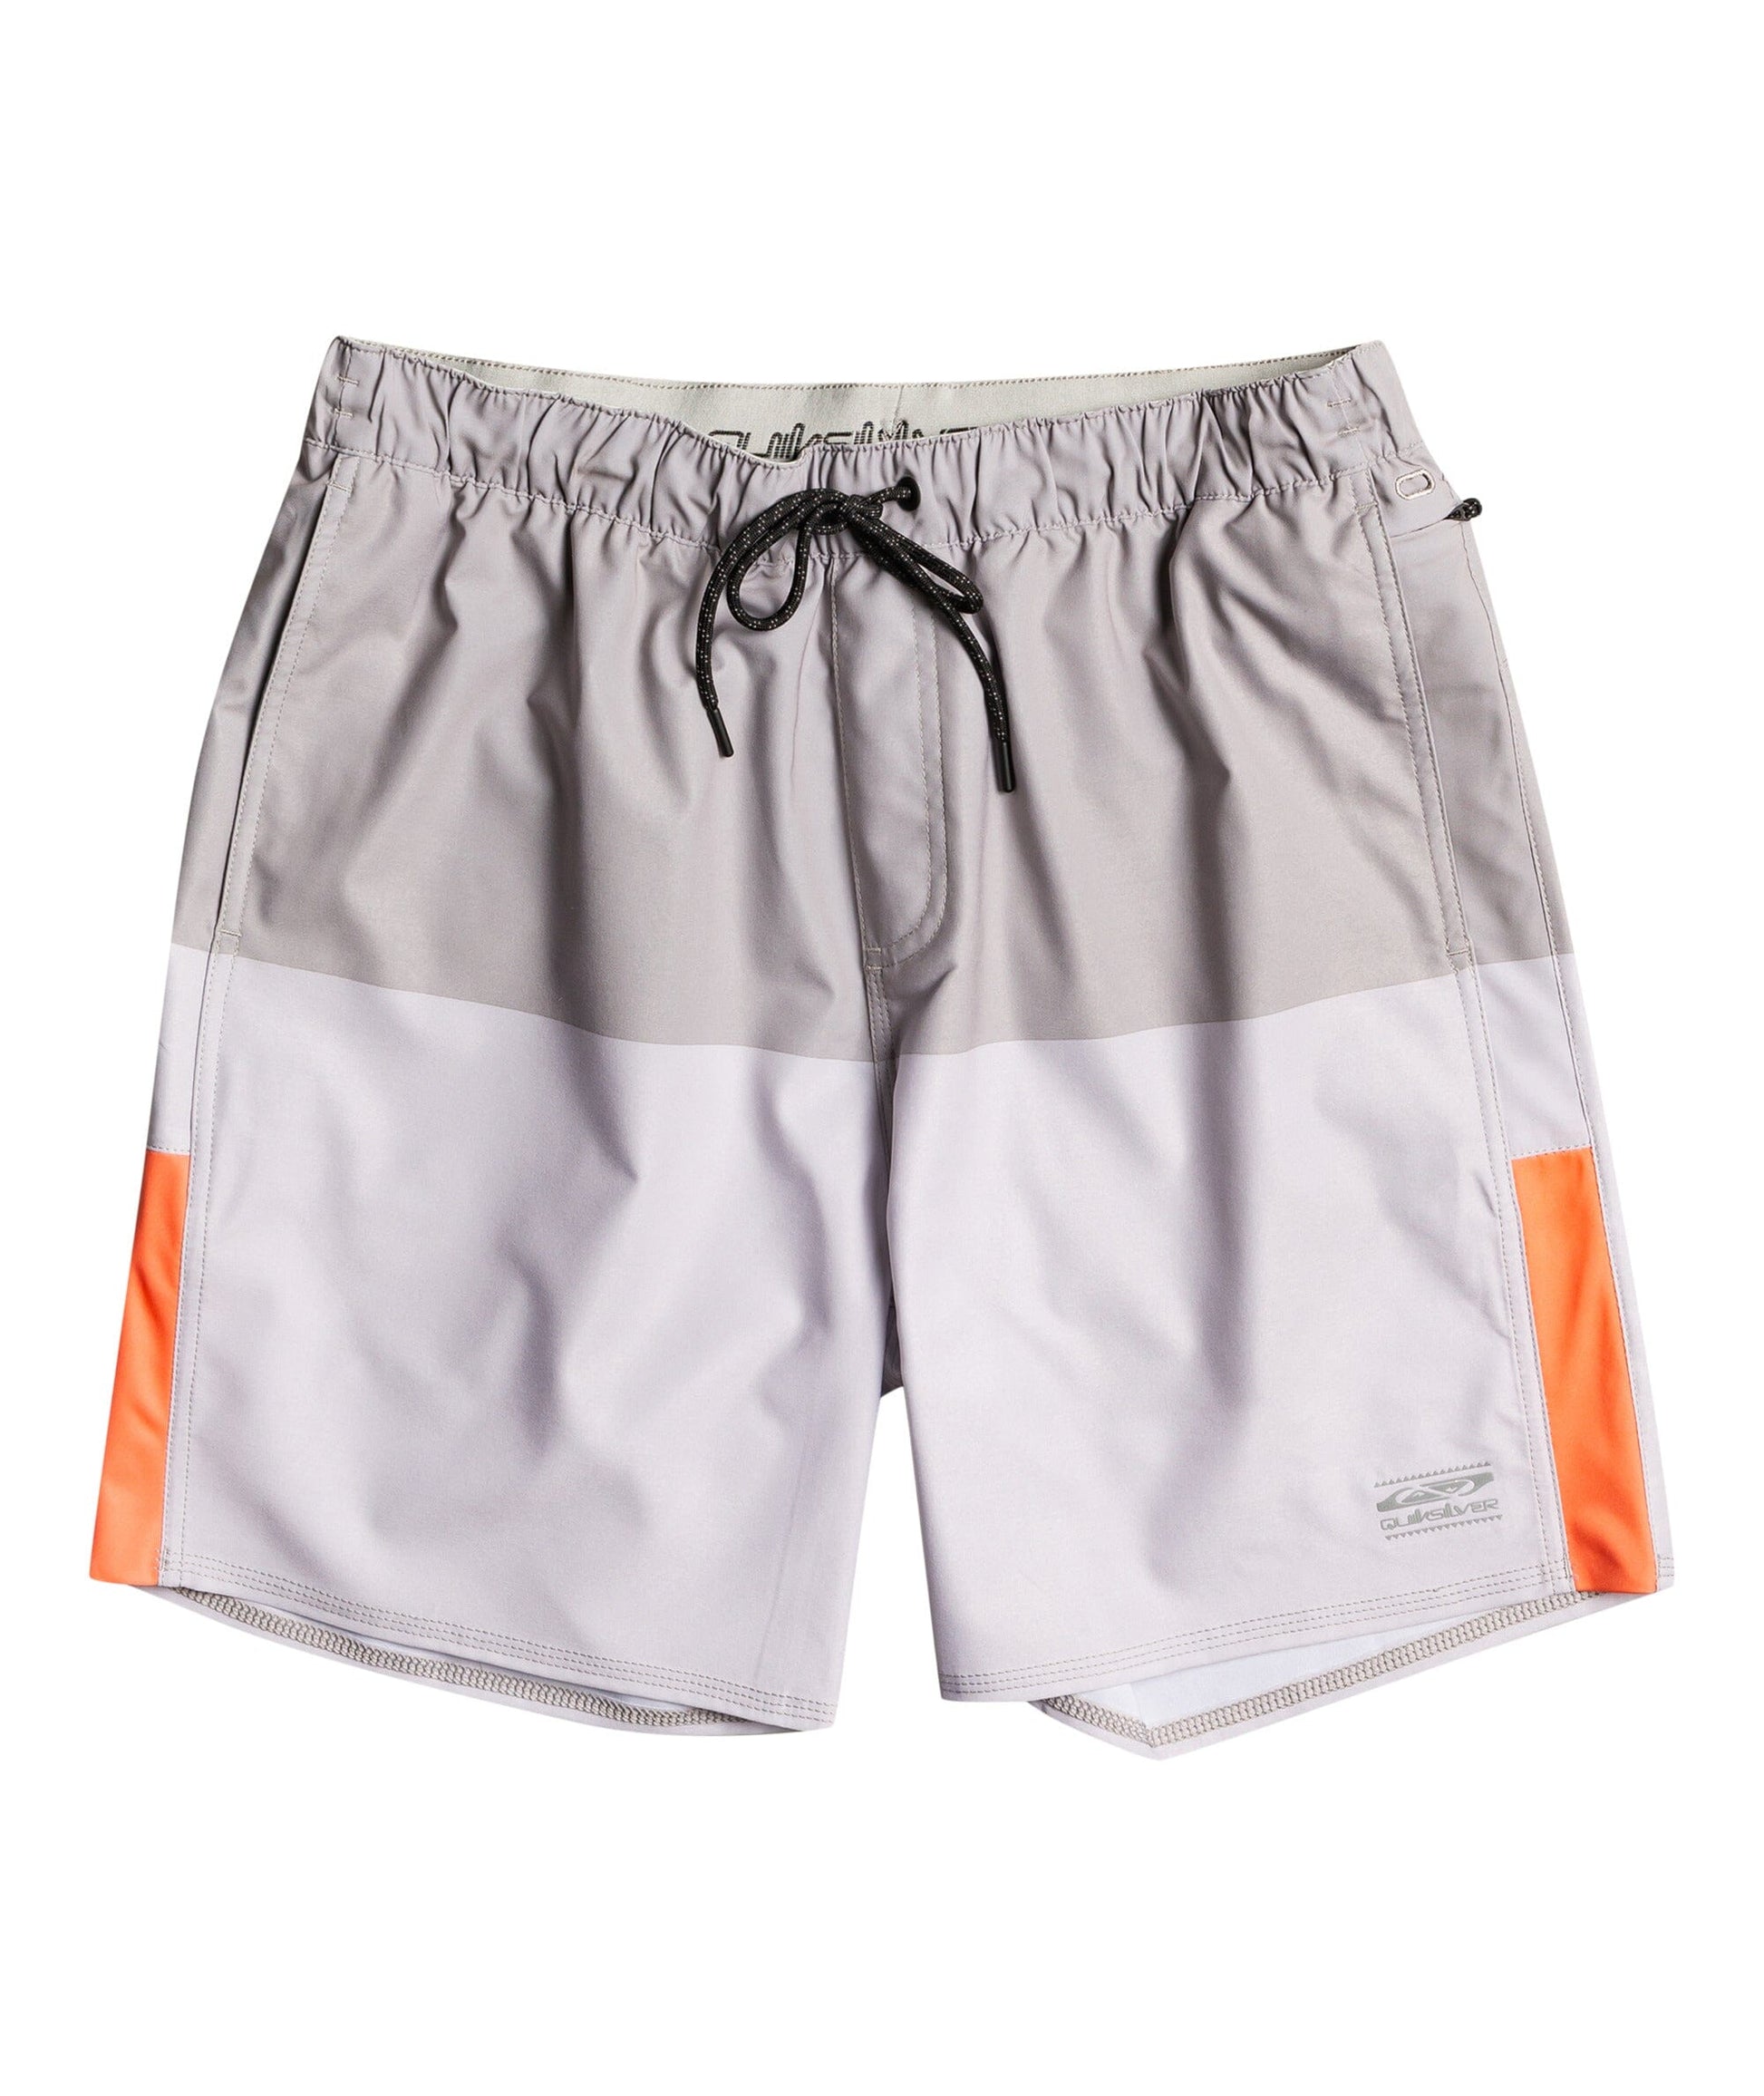 Quiksilver Omni Stretch 17" Training Shorts Apparel & Accessories > Clothing QUIKSILVER 